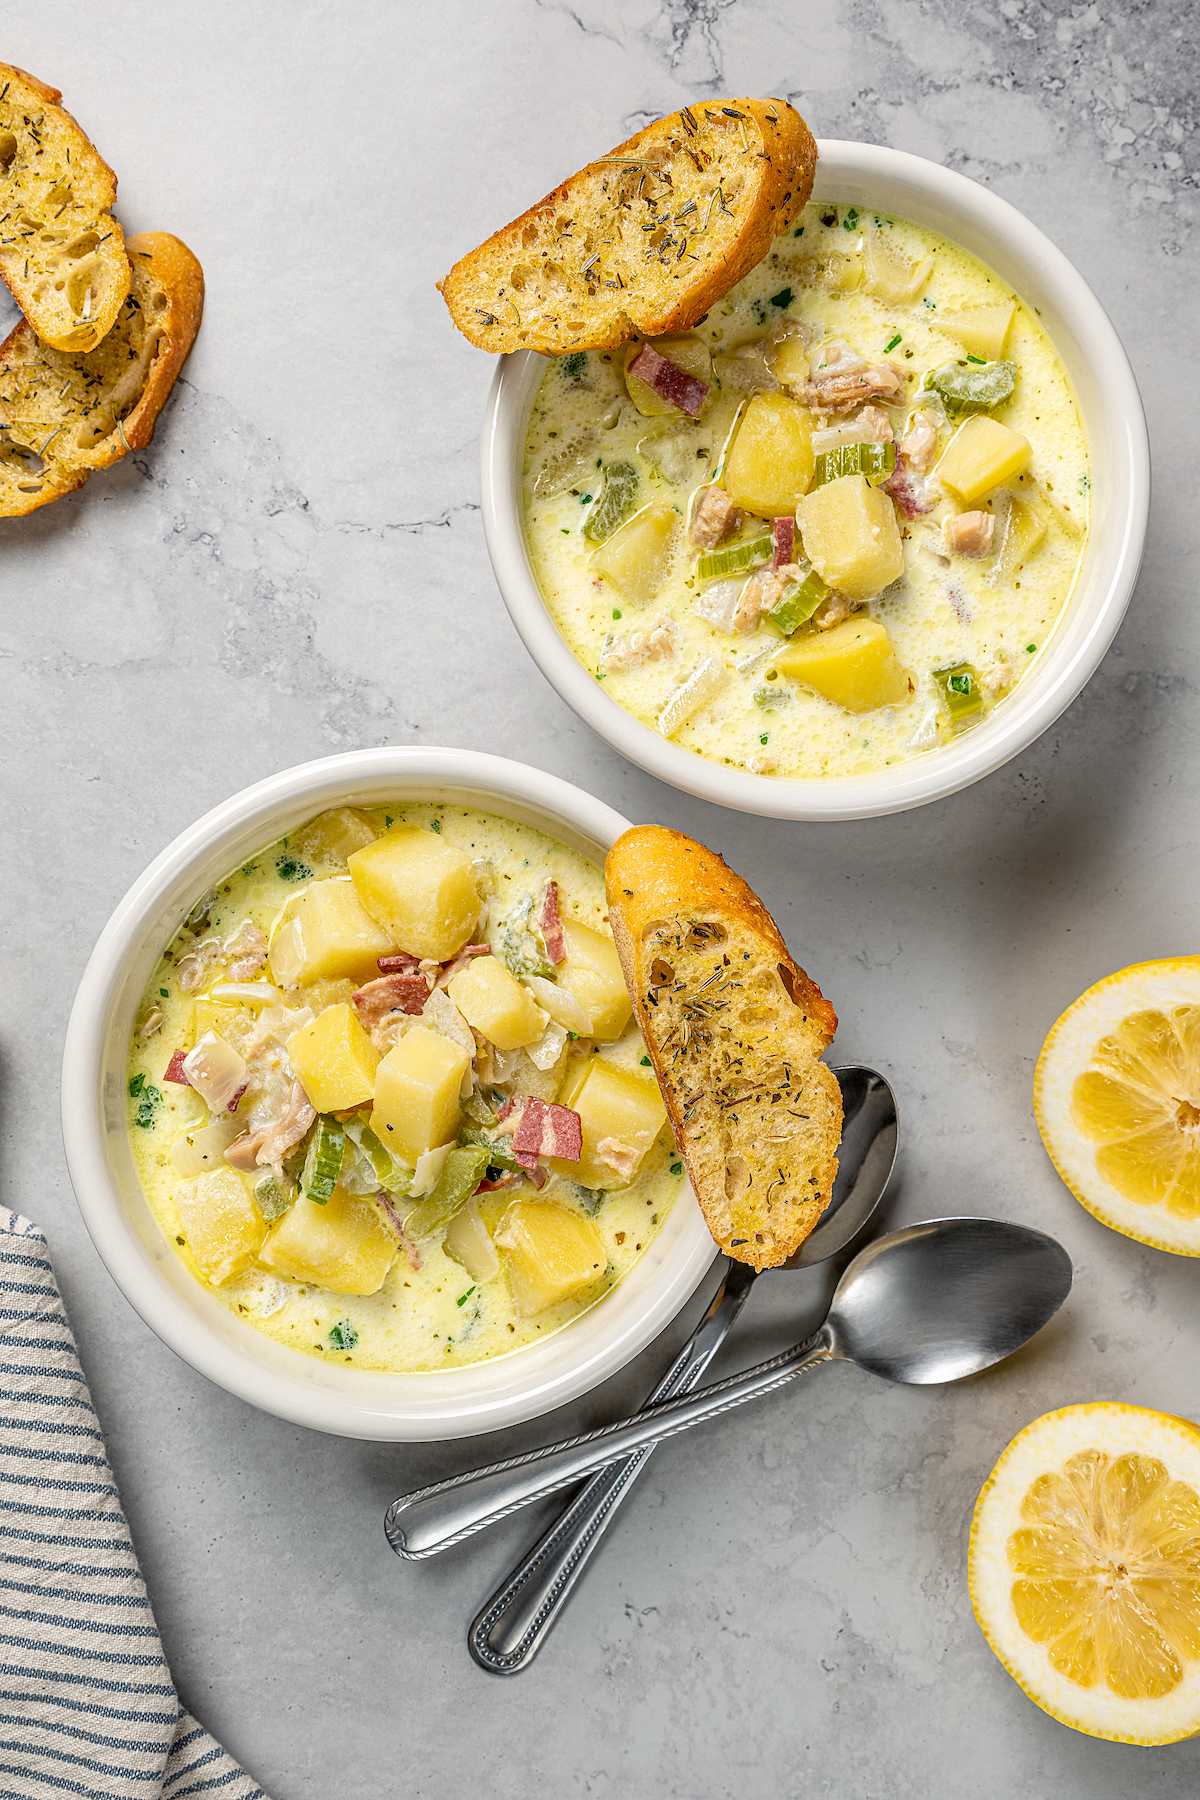 Bowls of clam chowder with lemon and crostini.